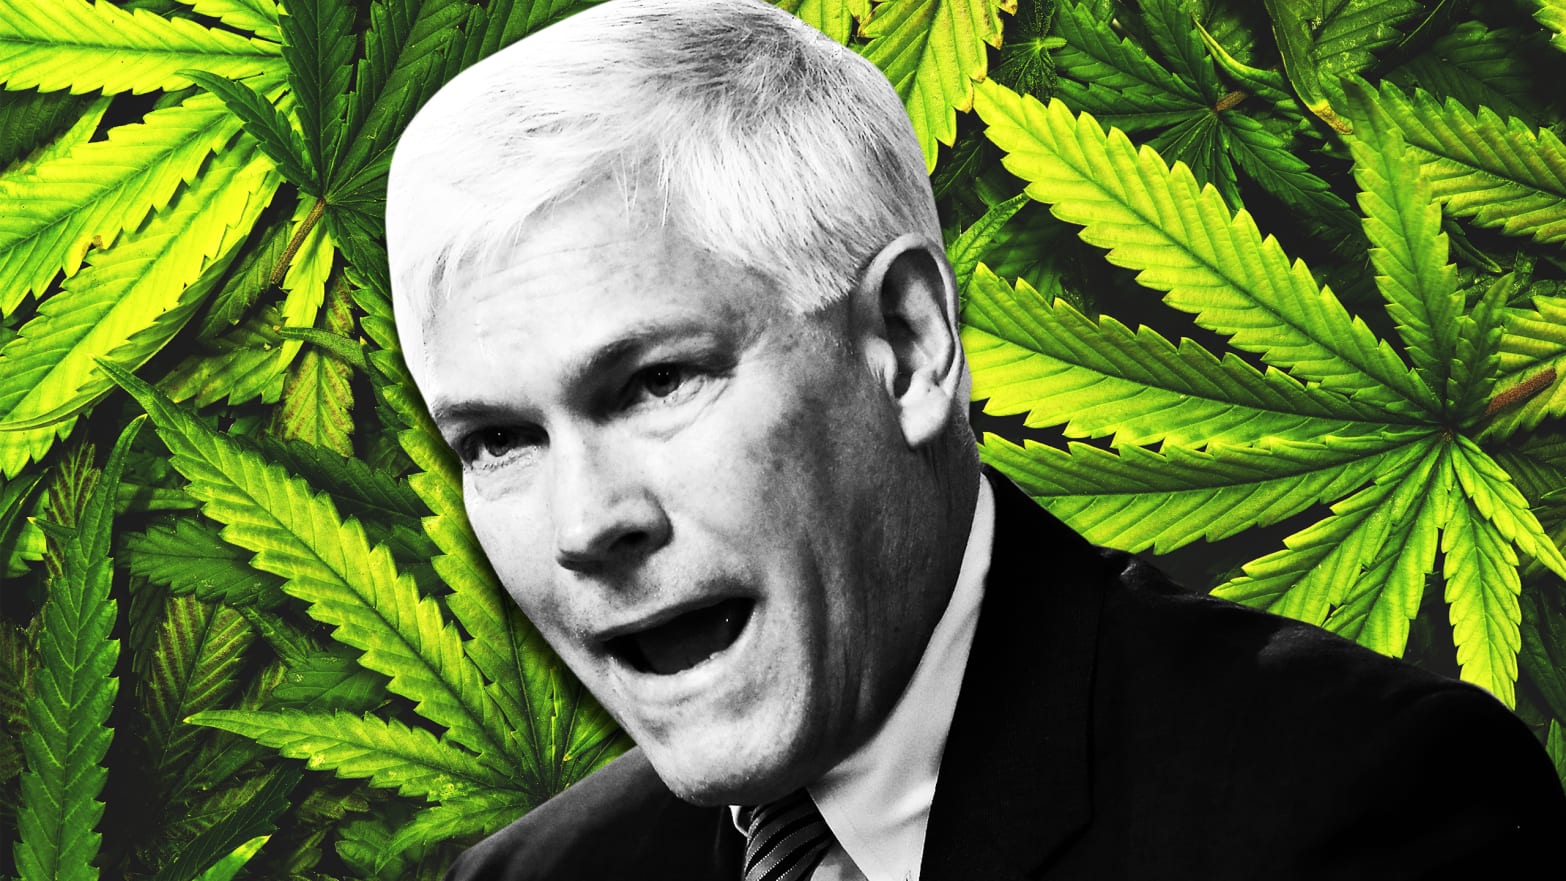 pete sessions colin allred medical marijuana november midterm election cannabis pot zartler mark christy cara autism autistic dcfs child protective services self injury